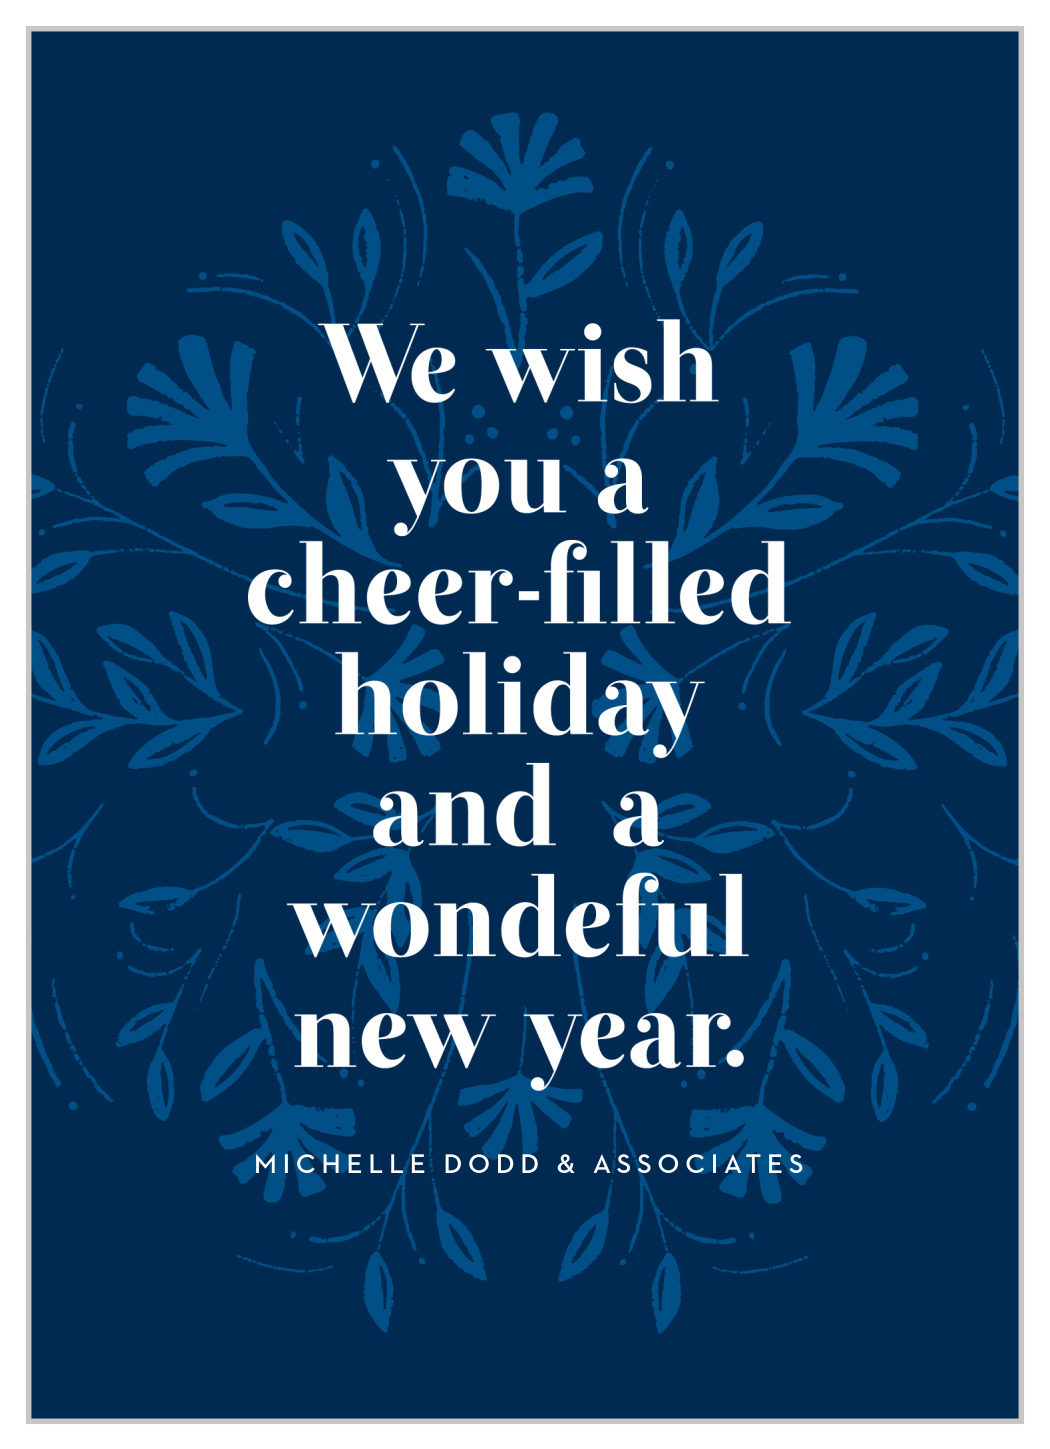 Floral Burst Corporate Holiday Cards